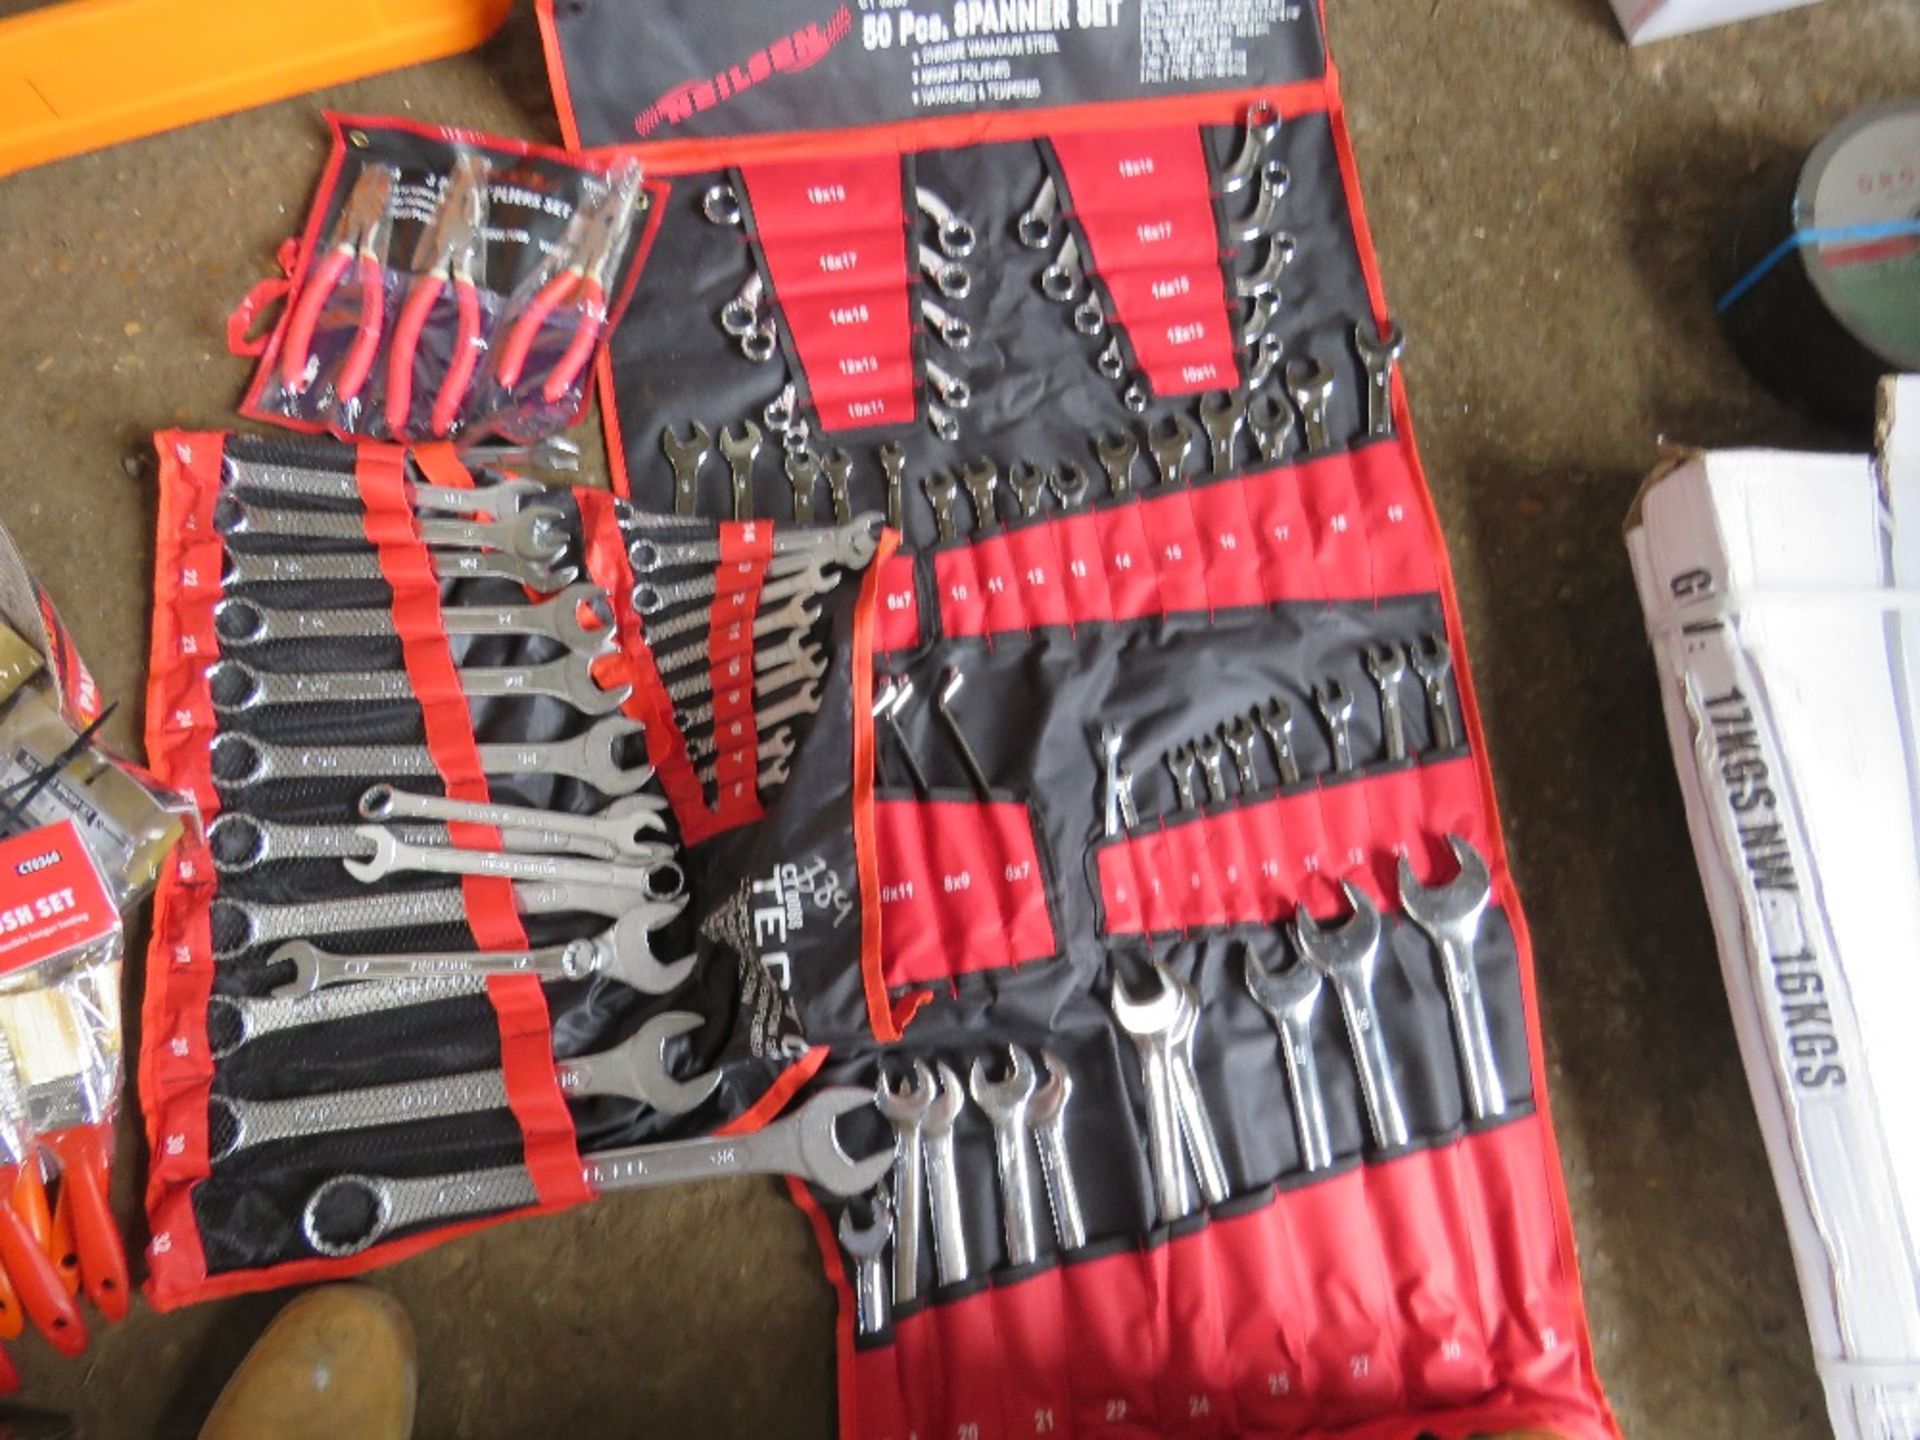 2 X SETS OF SPANNERS PLUS 3 X PLIERS.